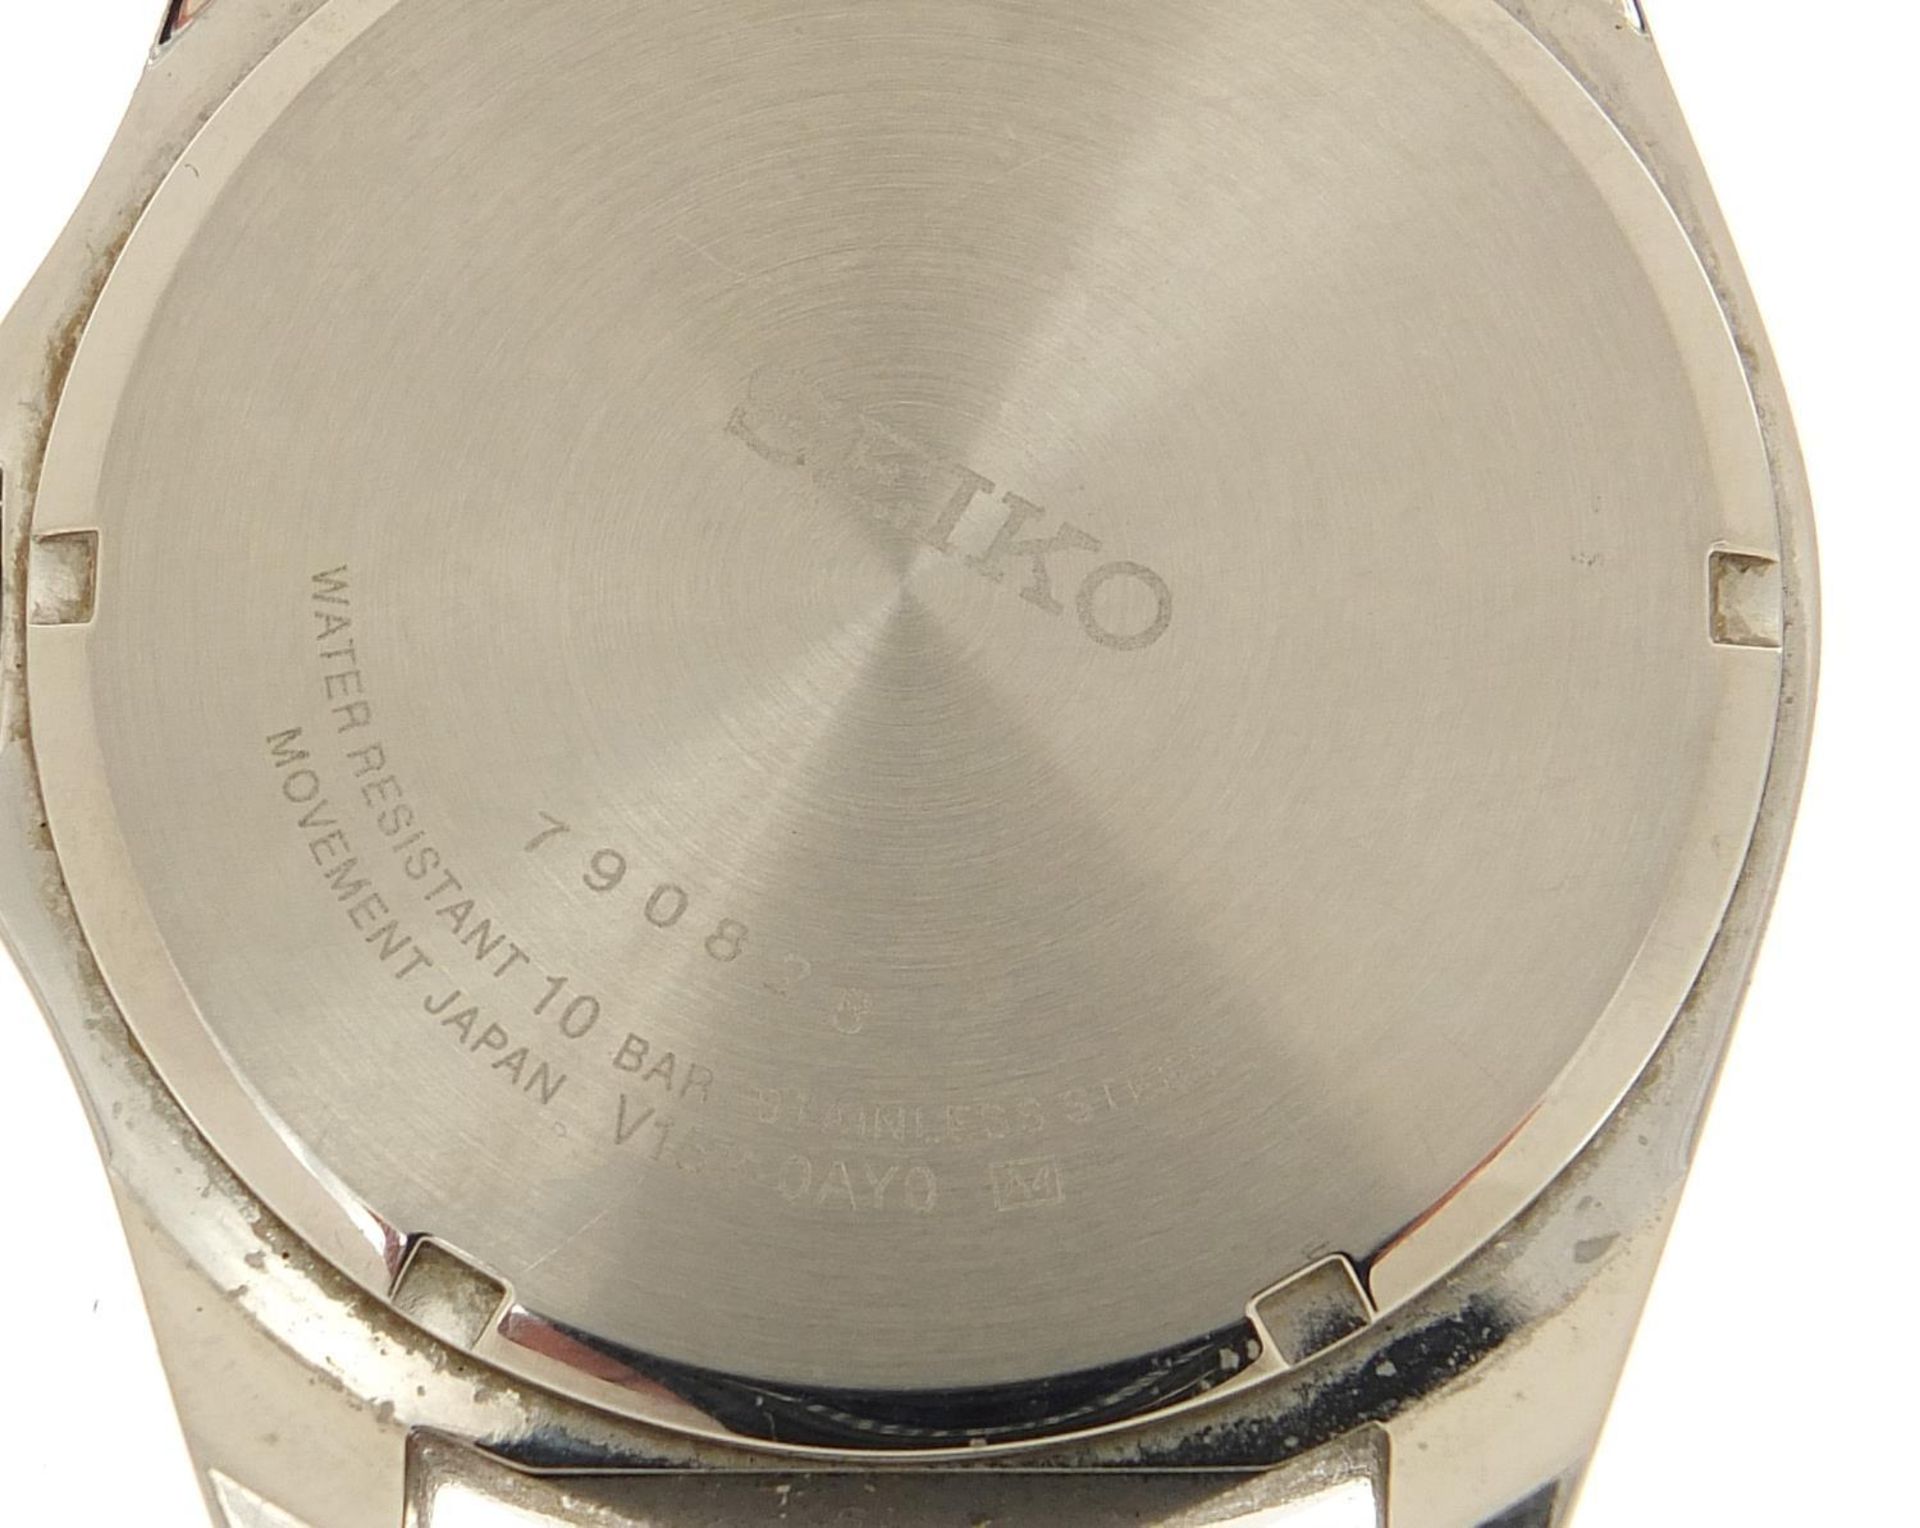 Seiko Solar, gentlemen's 100m diver's quartz wristwatch with day/date aperture, V158-0AYO with box - Image 6 of 8